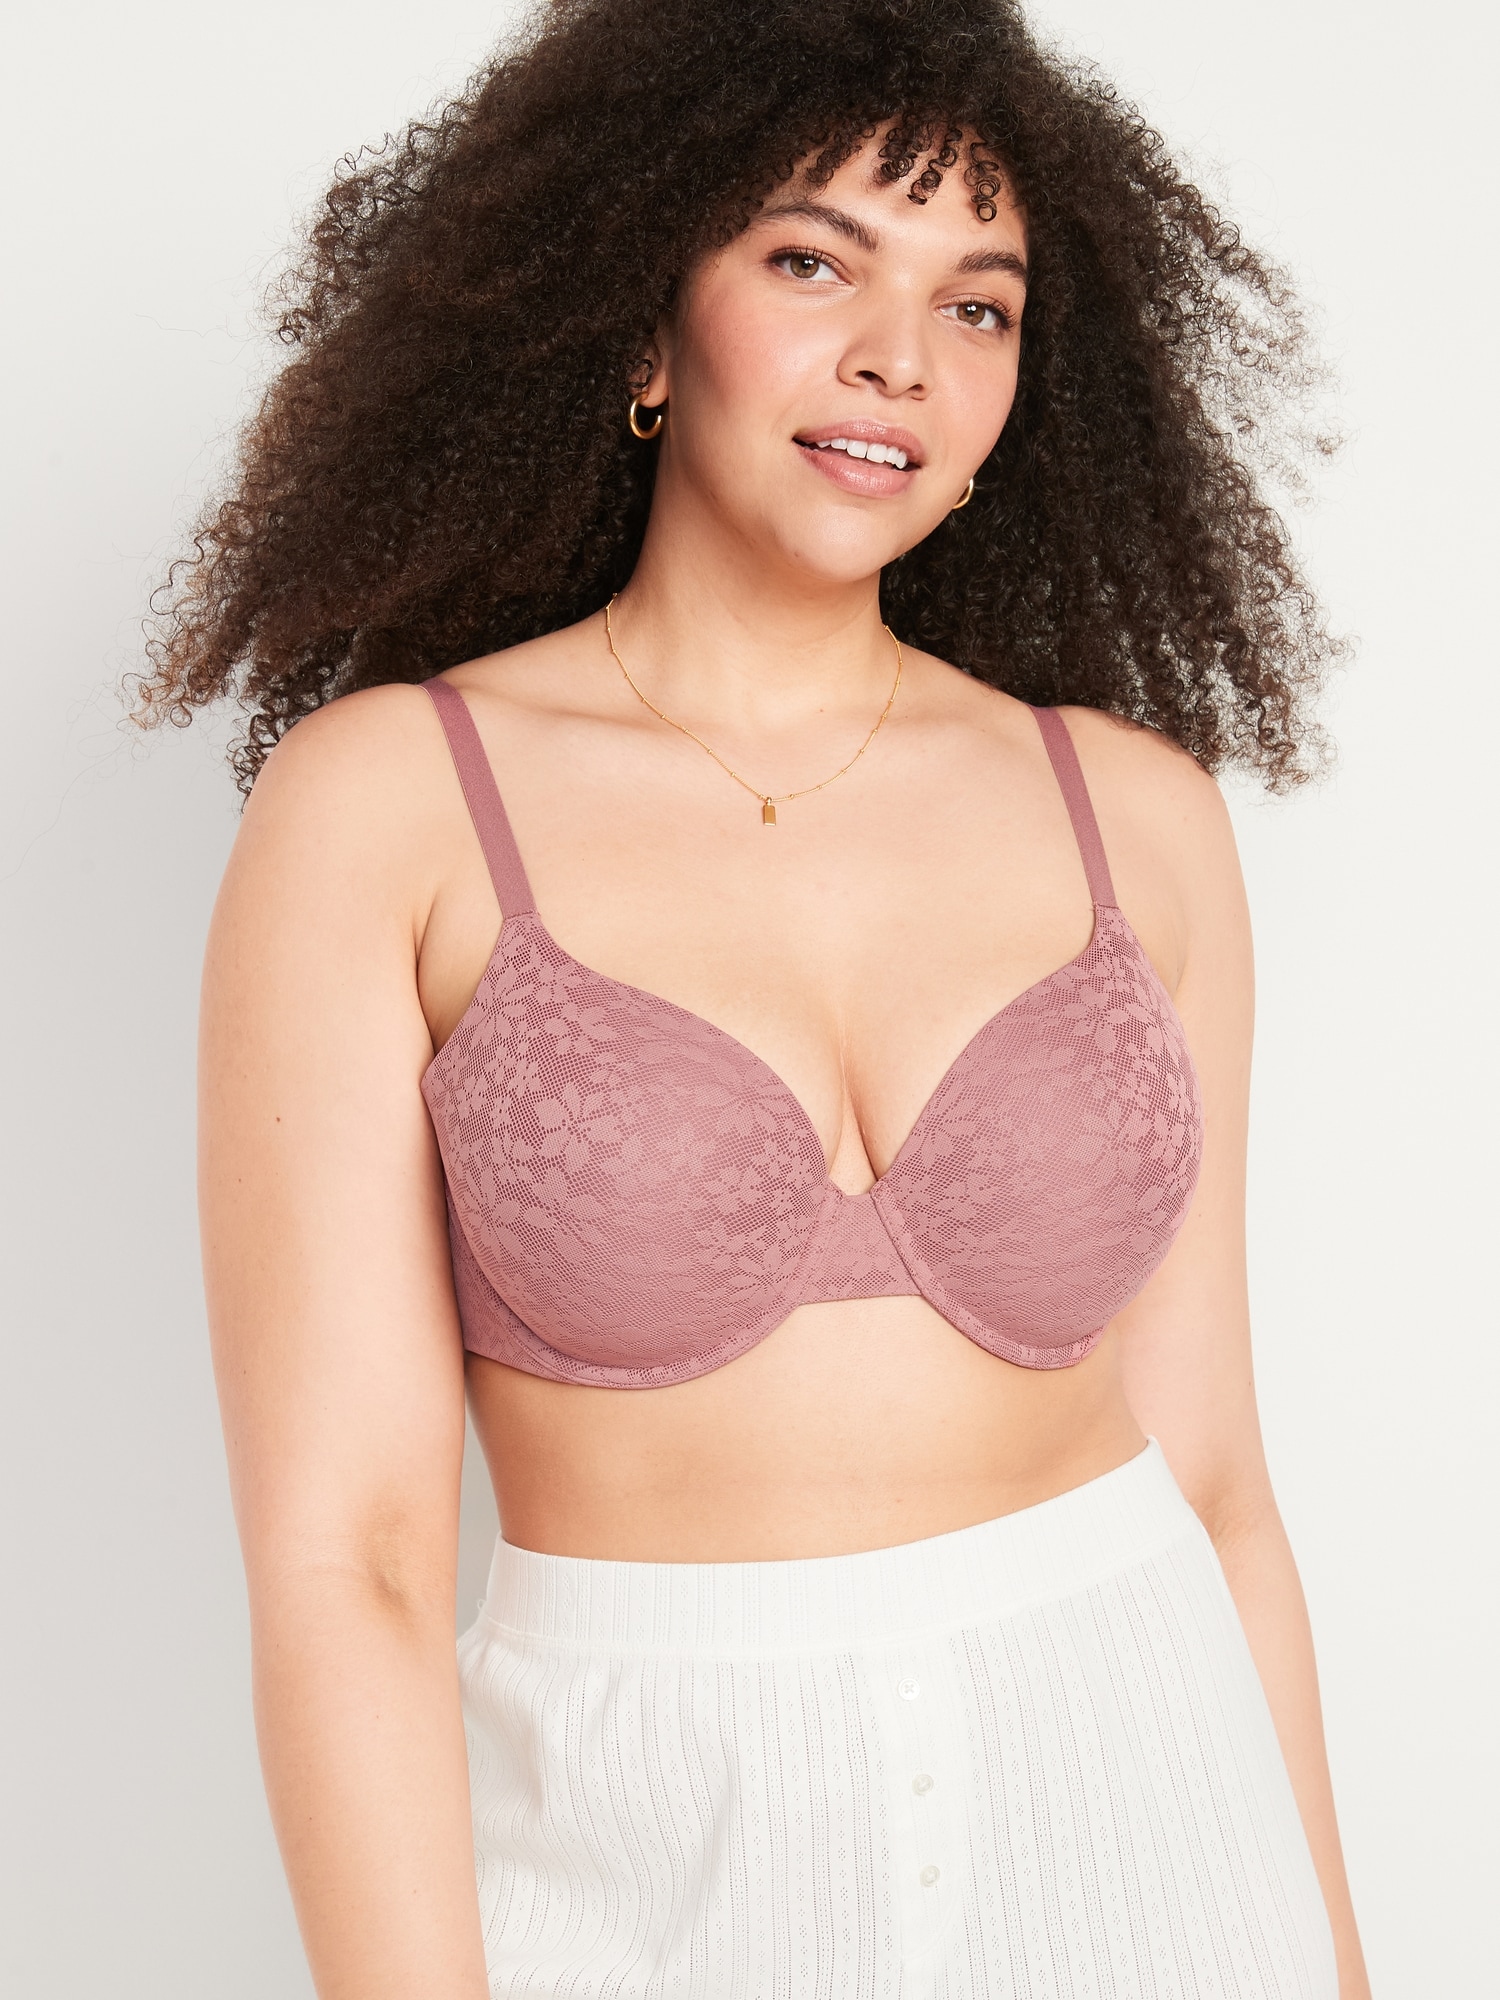 Embrace Straps Bra 44d With Underwire True Convertible Unlined